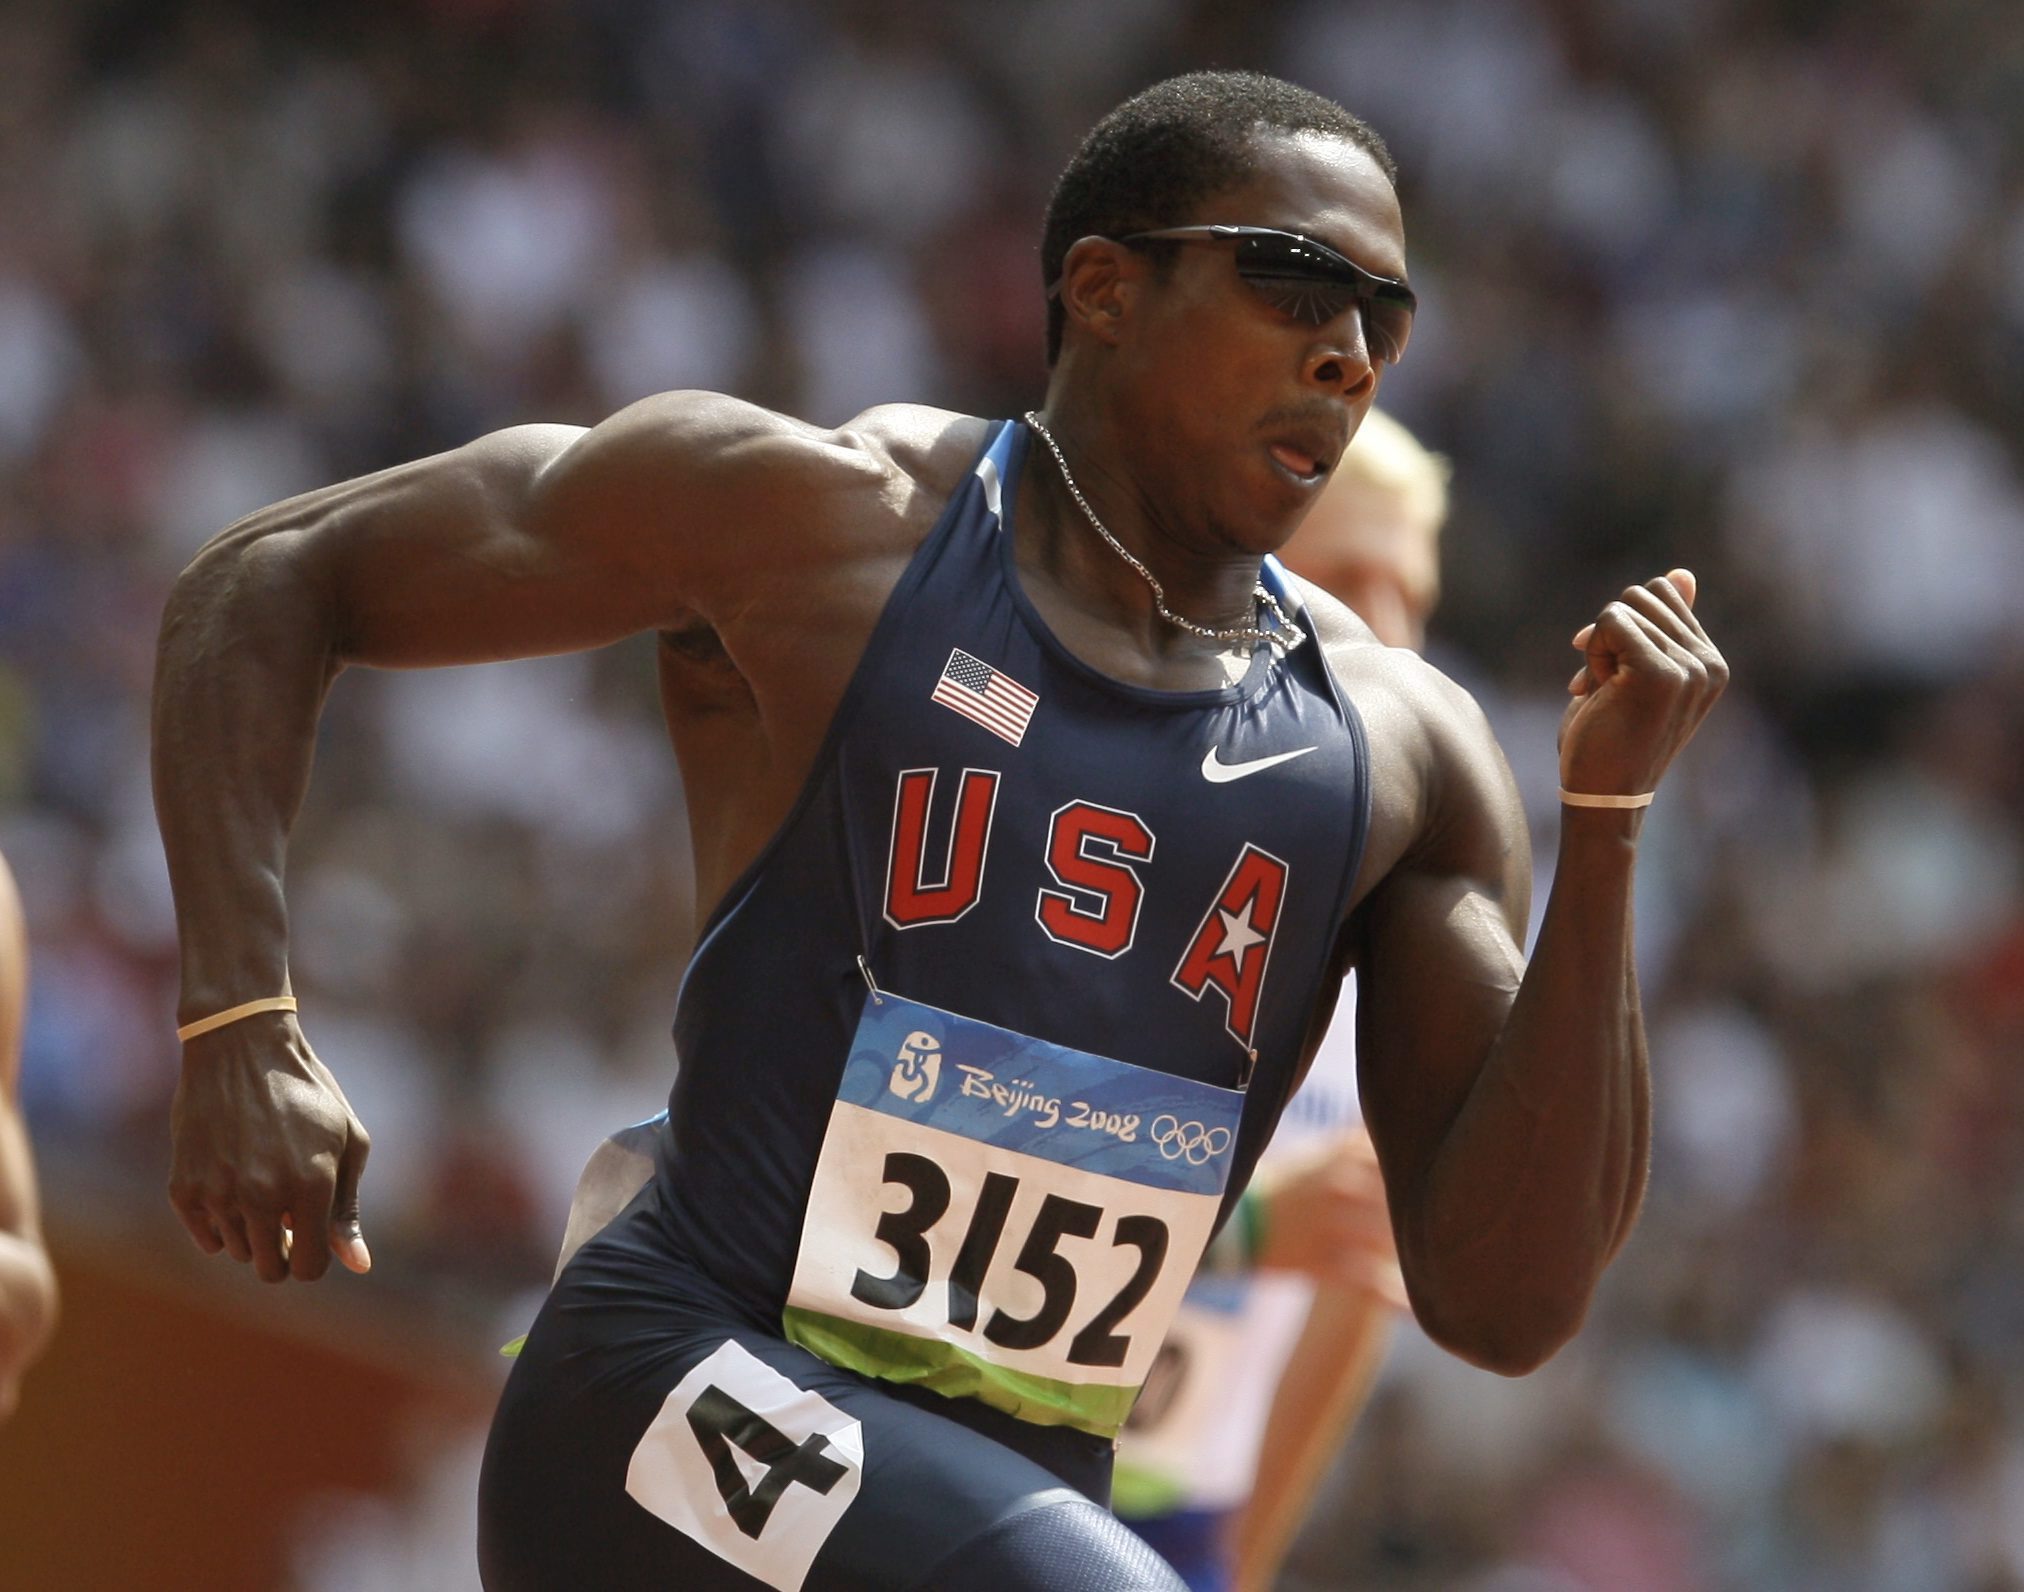 In this Aug. 18, 2008, file photo, Shawn Crawford of the United States competes in a heat of the men's 200-meter race during the athletics competitions in the National Stadium at the Beijing 2008 Olympics in Beijing. In the finals Crawford finished fourth, only to move up two spots when Netherlands Antilles sprinter Churandy Martina and American Wallace Spearmon were disqualified for running outside their lanes. But each time Crawford looked at his medal, he felt stabs of guilt. So he gave it back to Martina, who in his opinion beat him fair and square, even though the rules said differently(AP Photo/David J. Phillip, File)